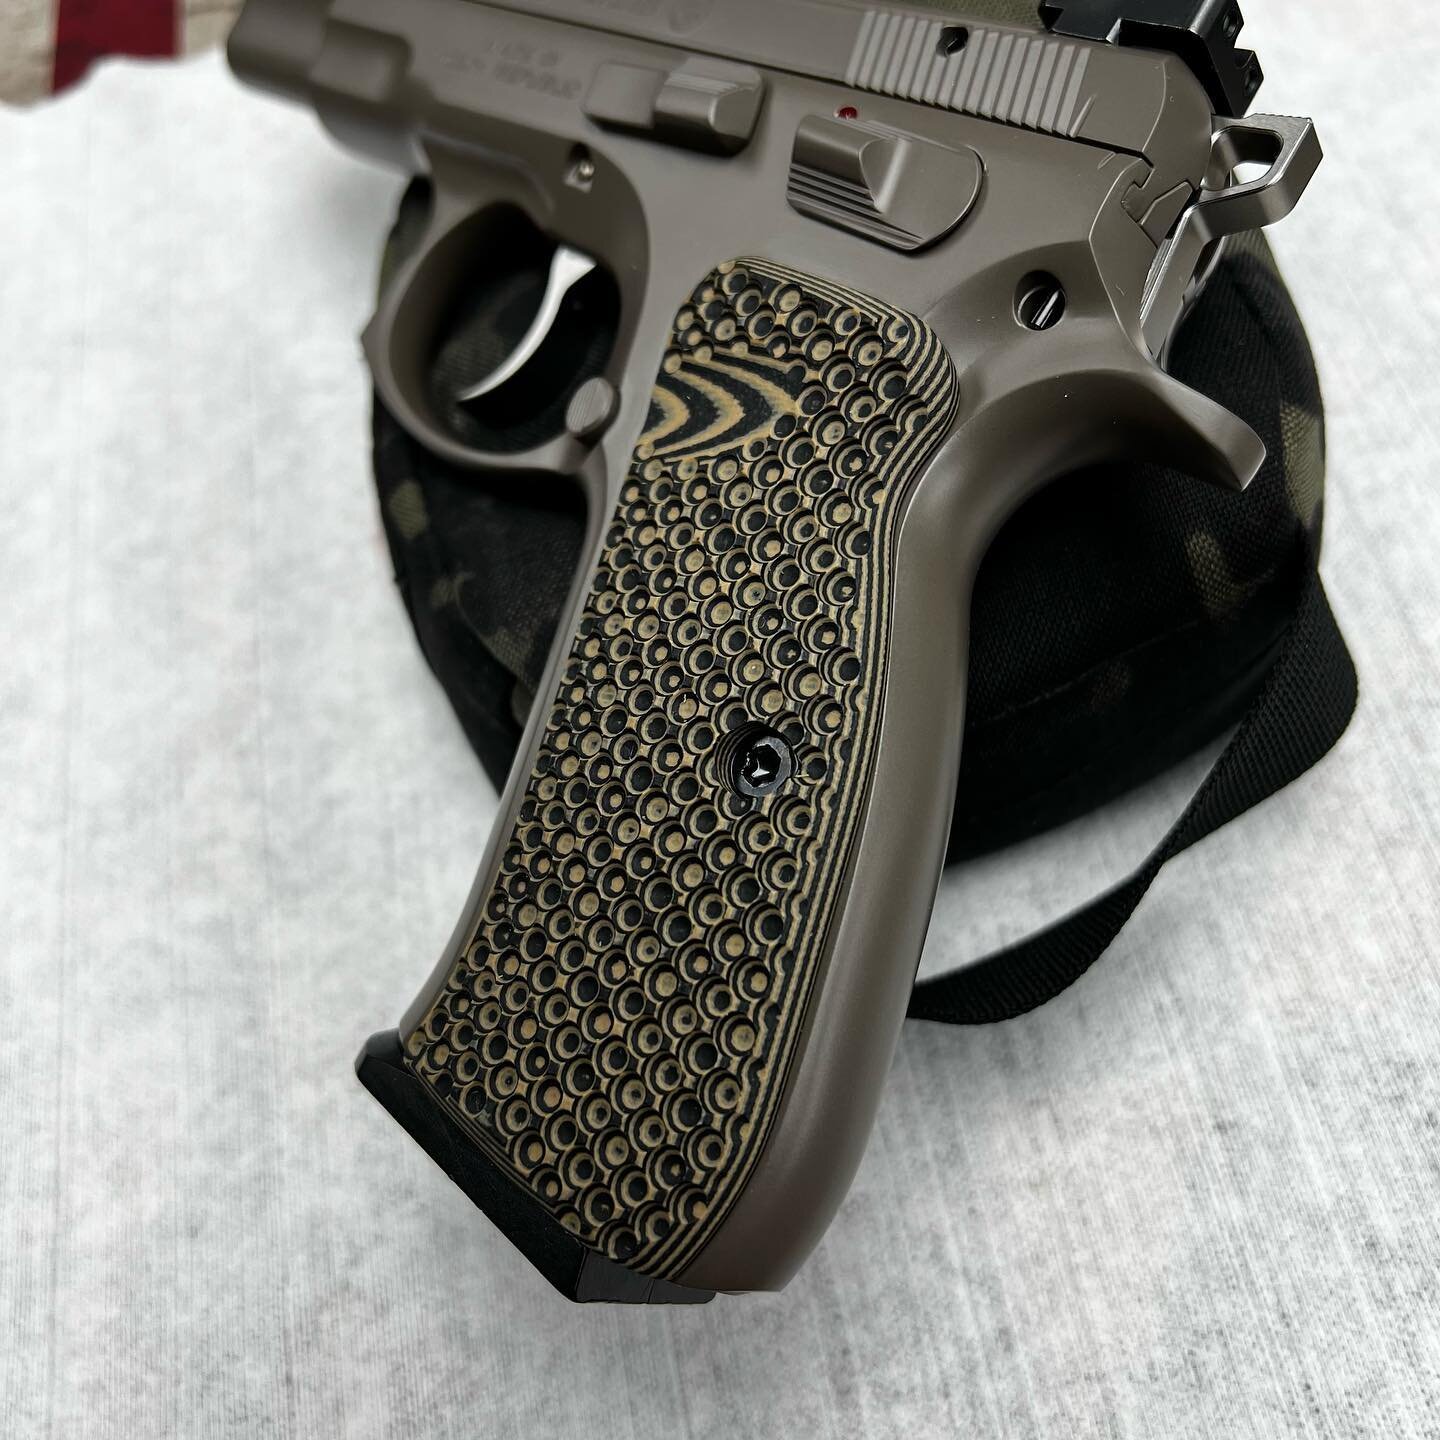 @lokgrips came in and I love them but I should&rsquo;ve waited to coat the CZ to better match the brown in the grips. I&rsquo;m thinking of re-coating with one of these two colors with black accents on mag release, takedown lever, and possibly the sa